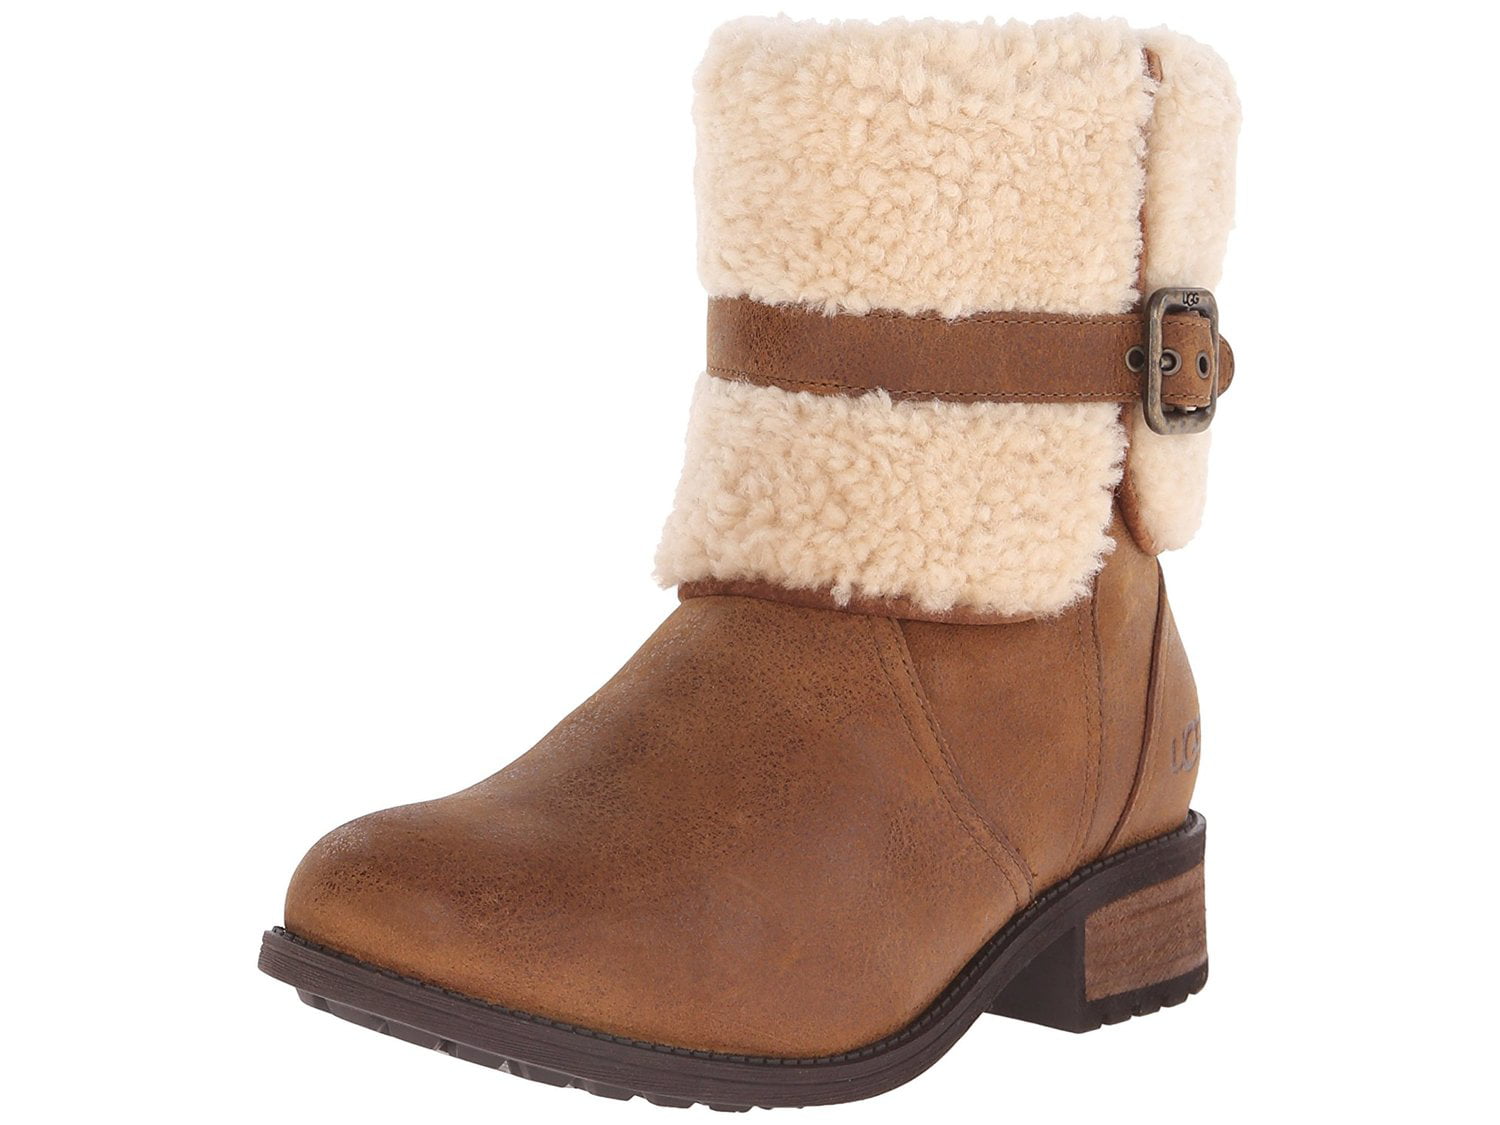 uggs winter boots canada